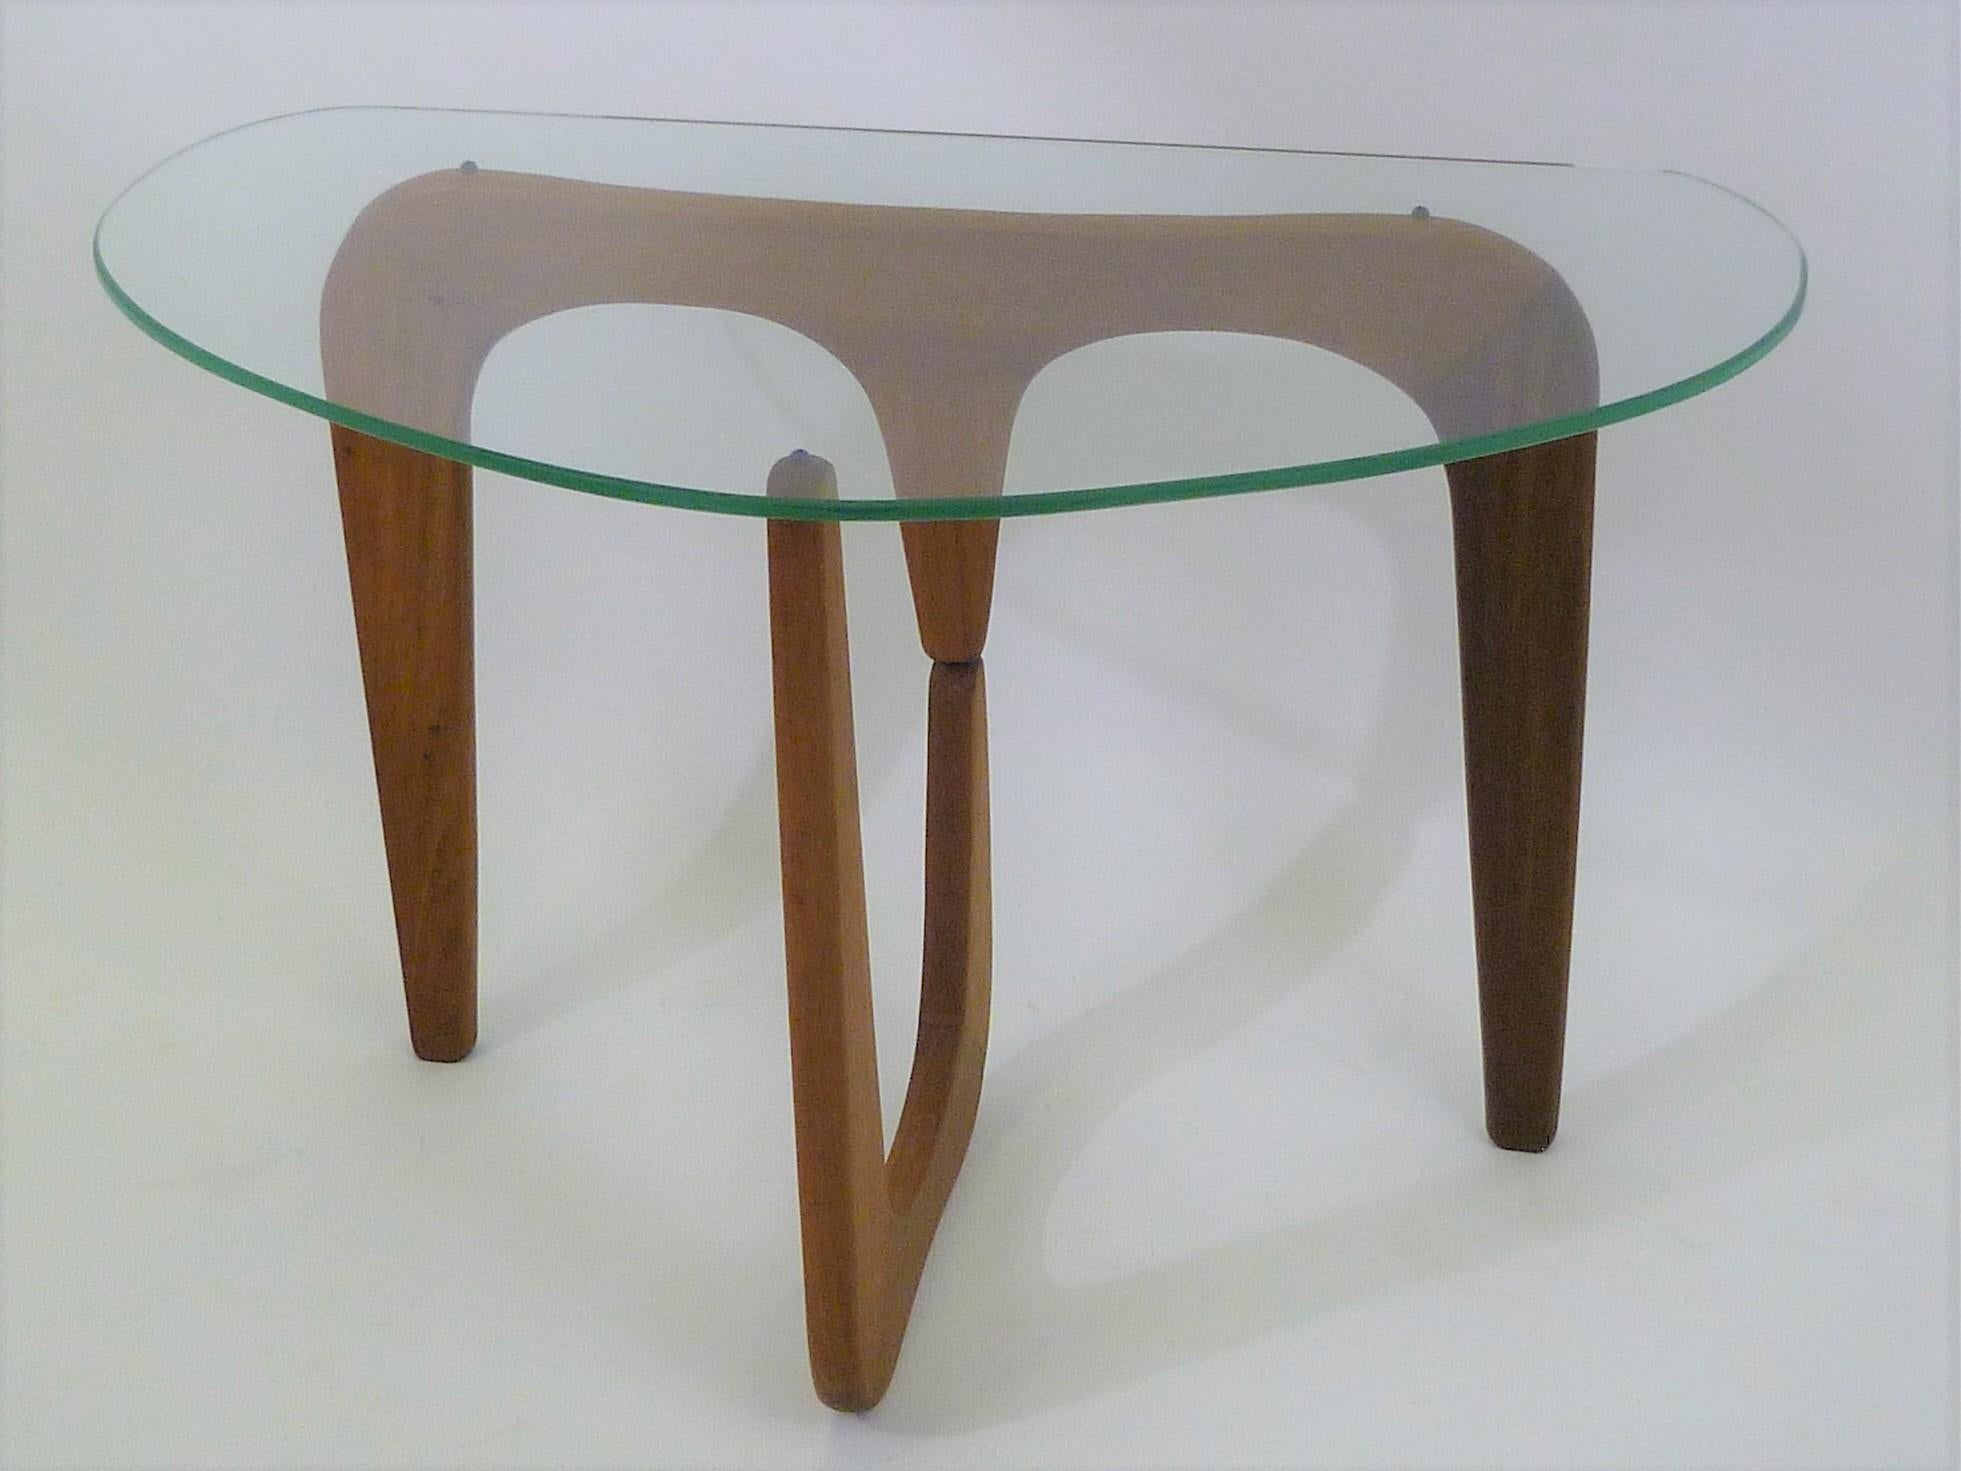 Carved 1950s Isamu Noguchi Style Organic Modern Glass Top Side Tables